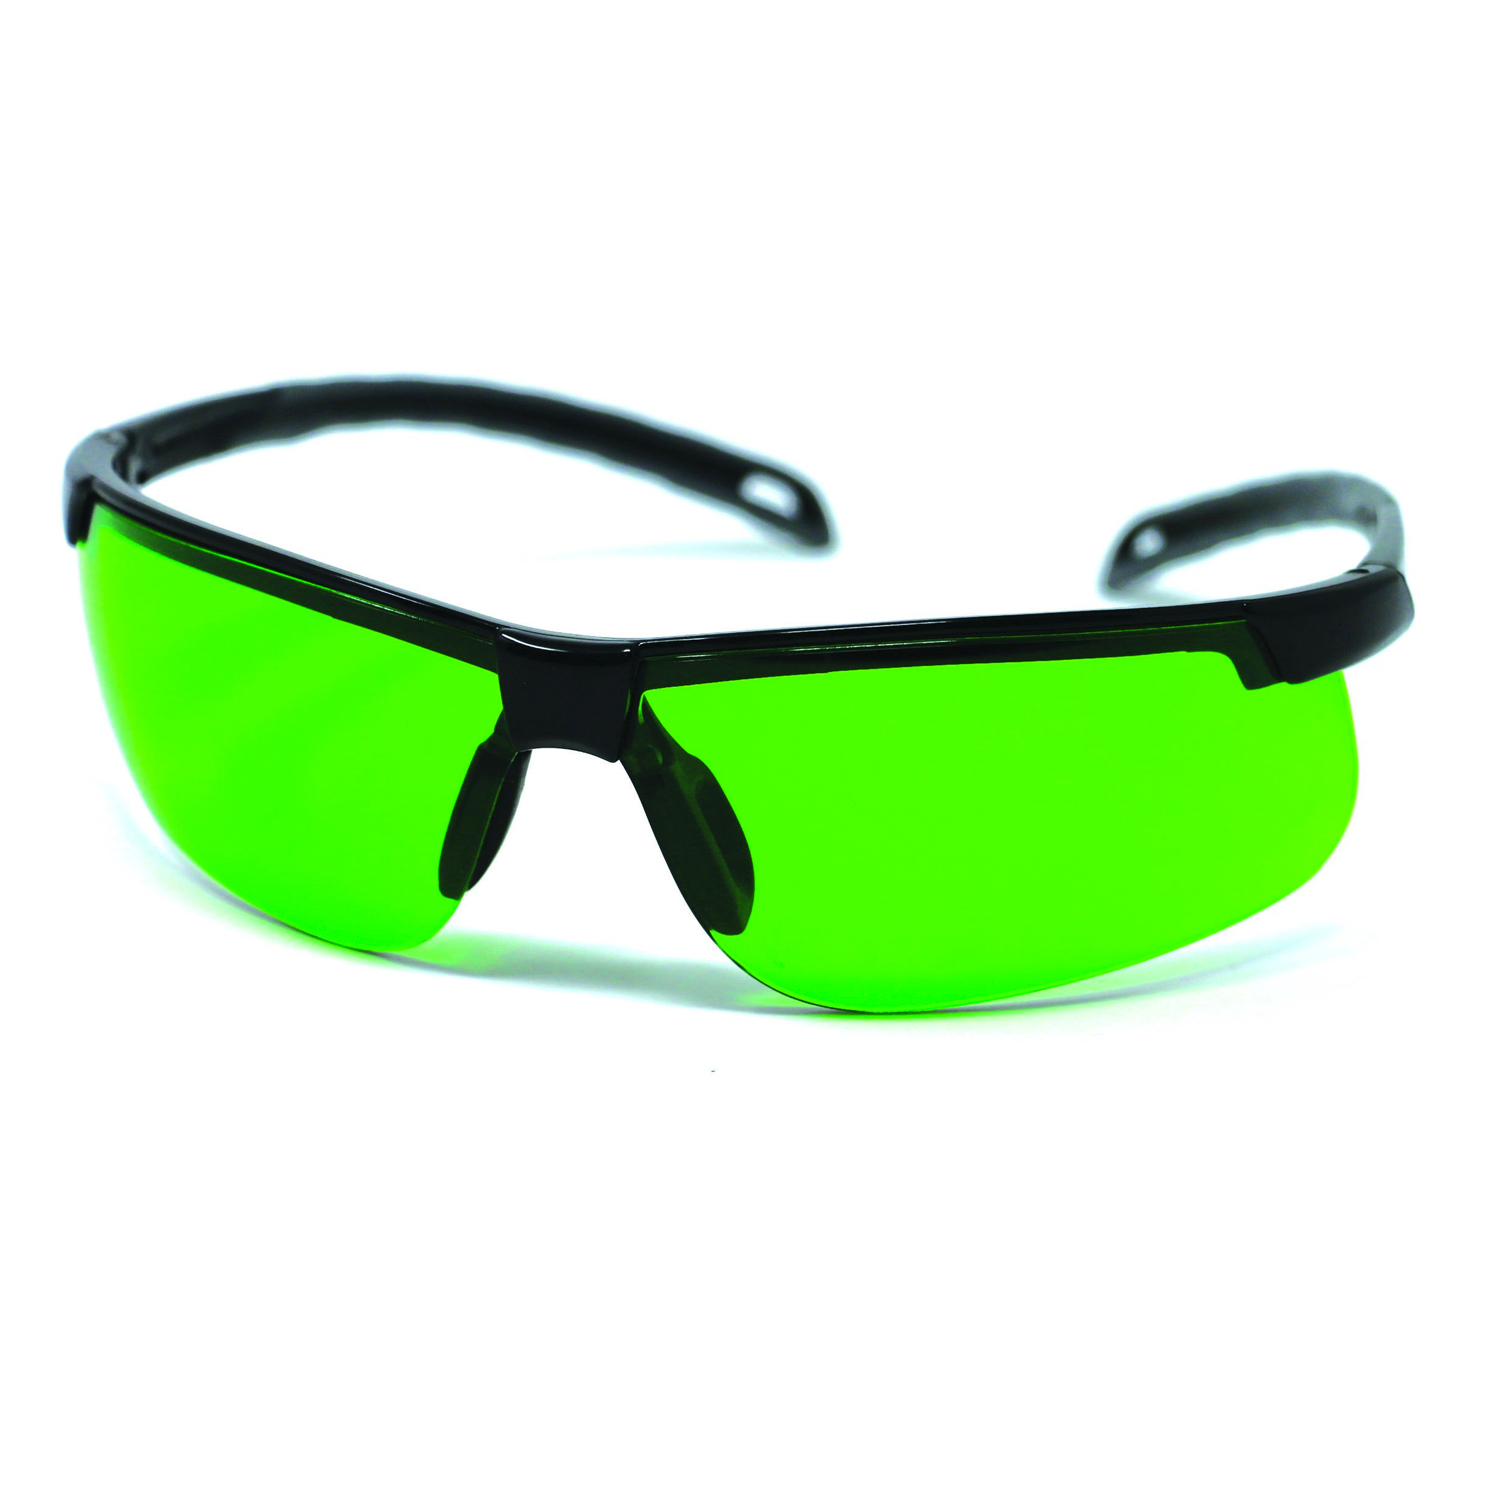 LaserVision Green Glasses